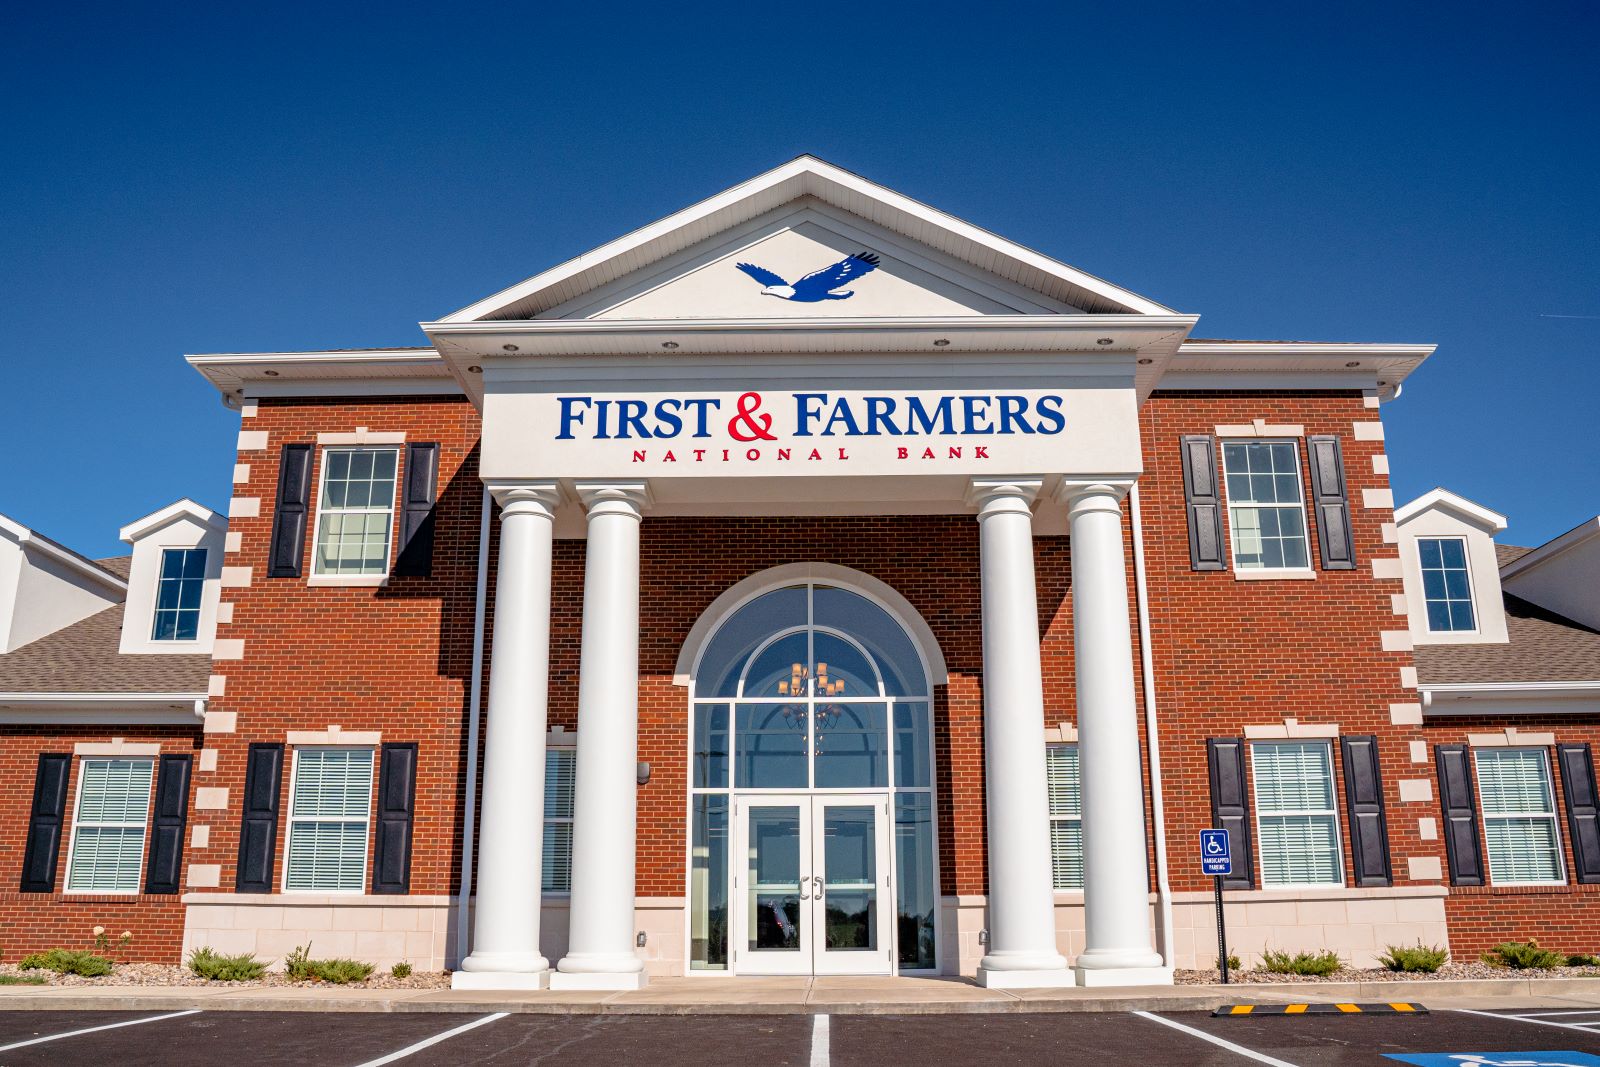 First and Farmers National Bank